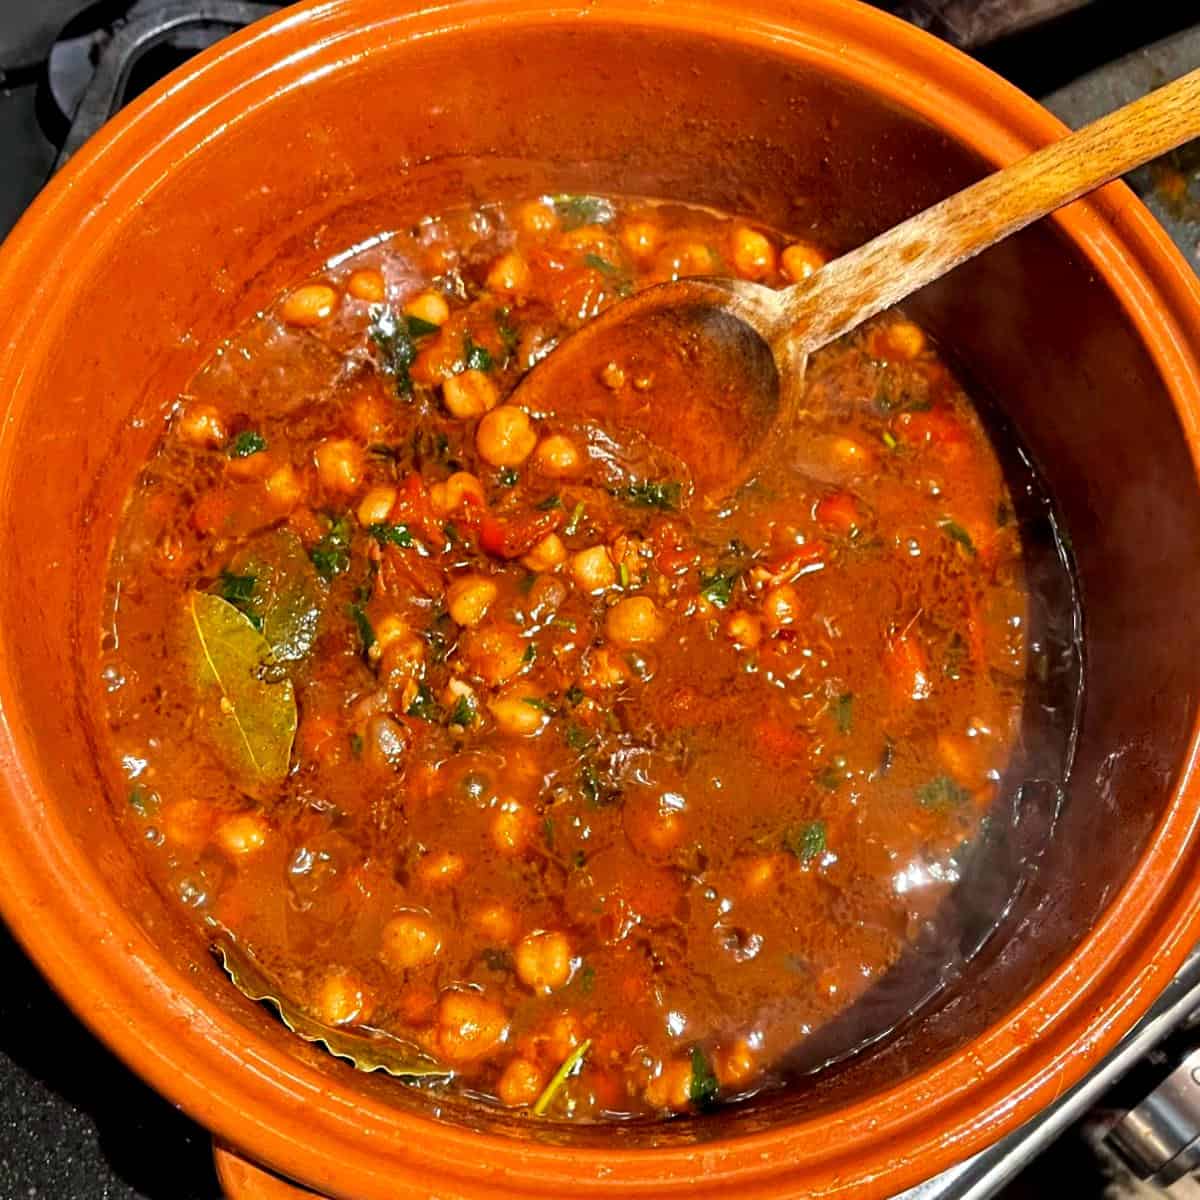 Parsley added to cooked Lebanese chickpea stew in clay pot.